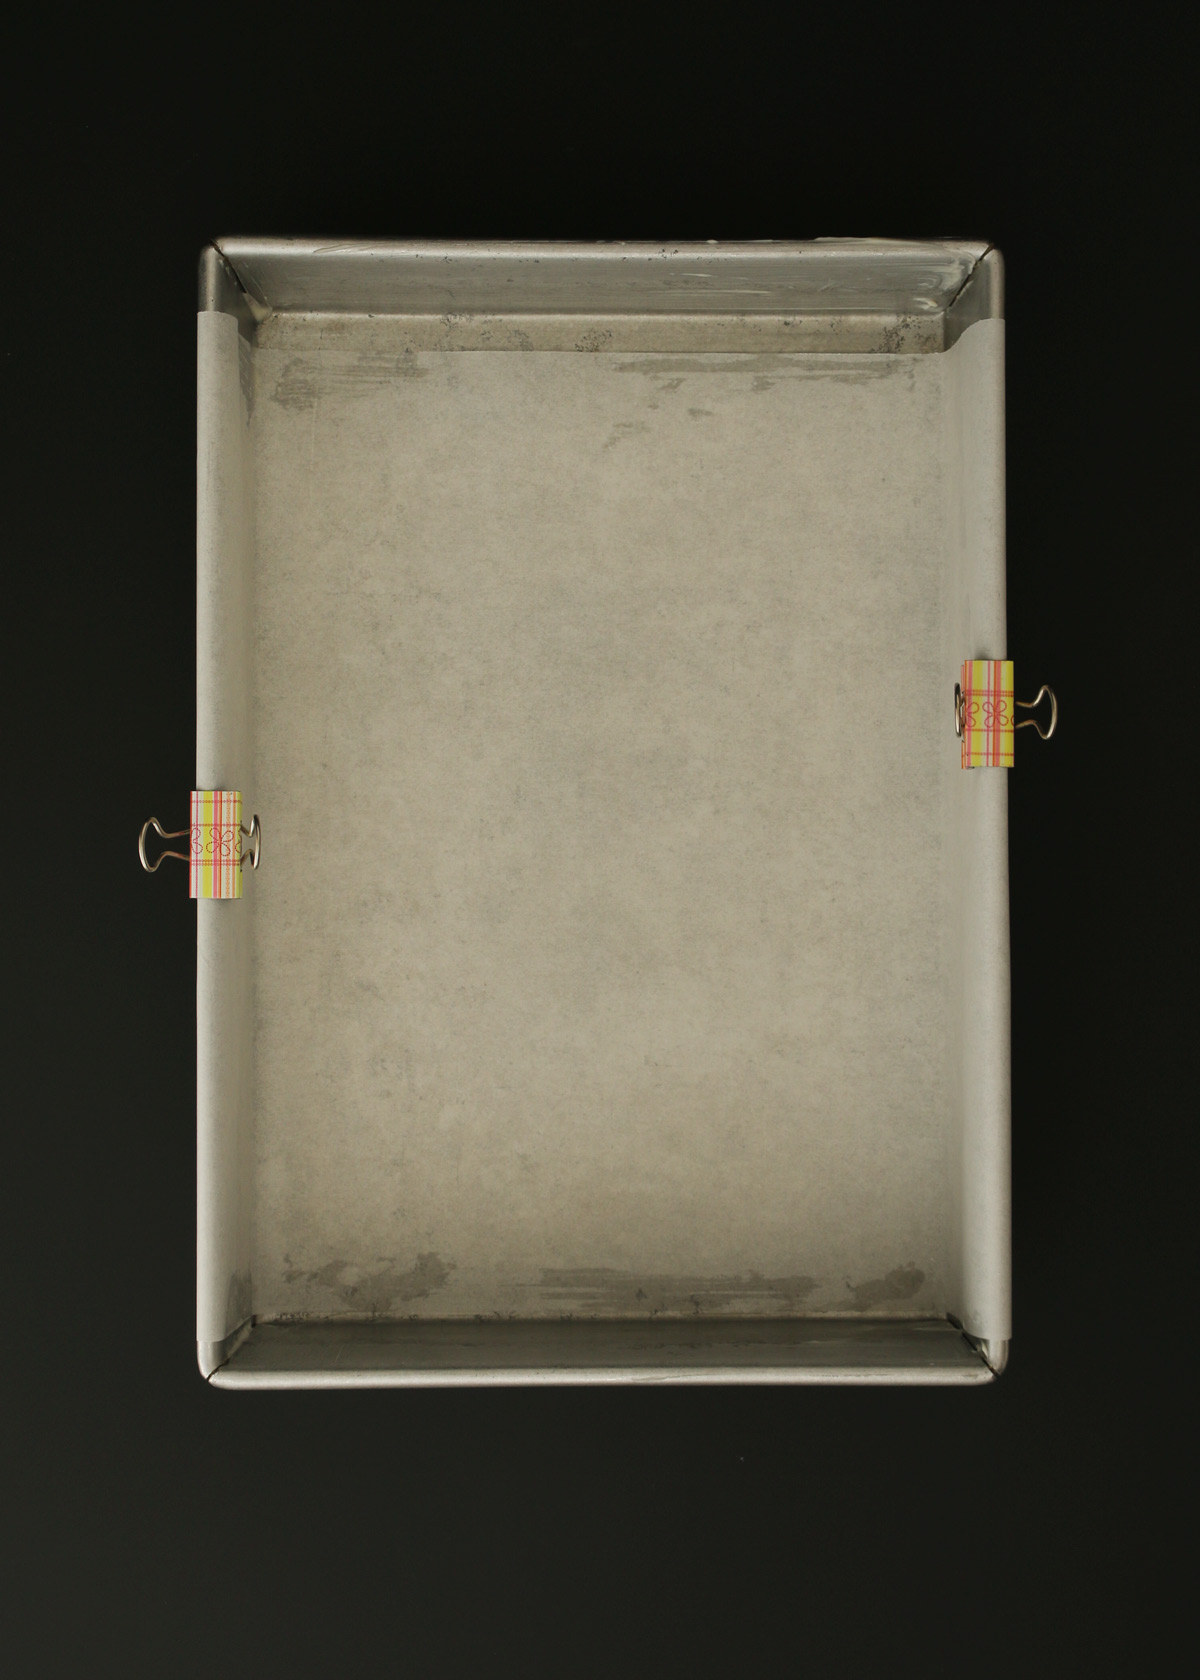 9X13-inch pan lined with parchment paper held on with binder clips.